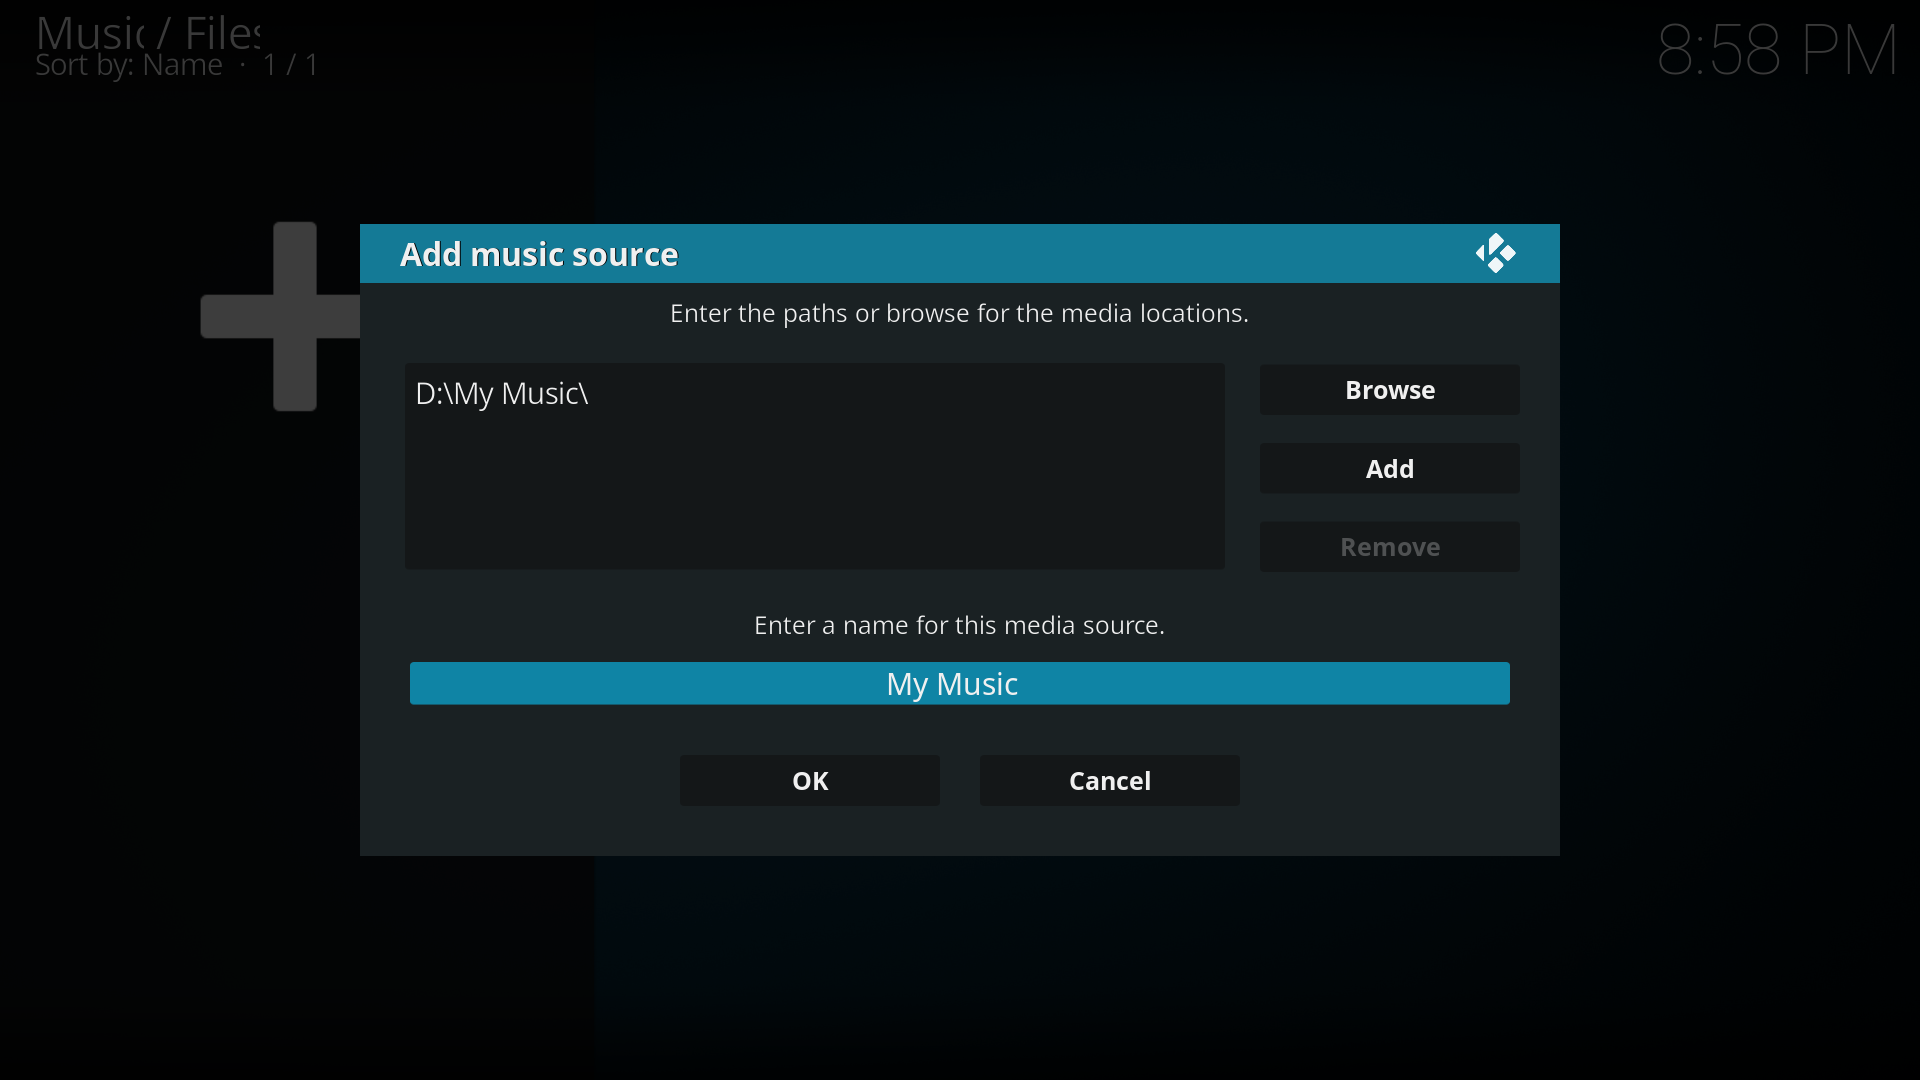 Step 5: You will now be taken back to the Add music source window where under Enter a name for this media source you can name your media source. If you don't enter a name then, by default, Kodi will use the folder name as the name for your source. You can then select OK.